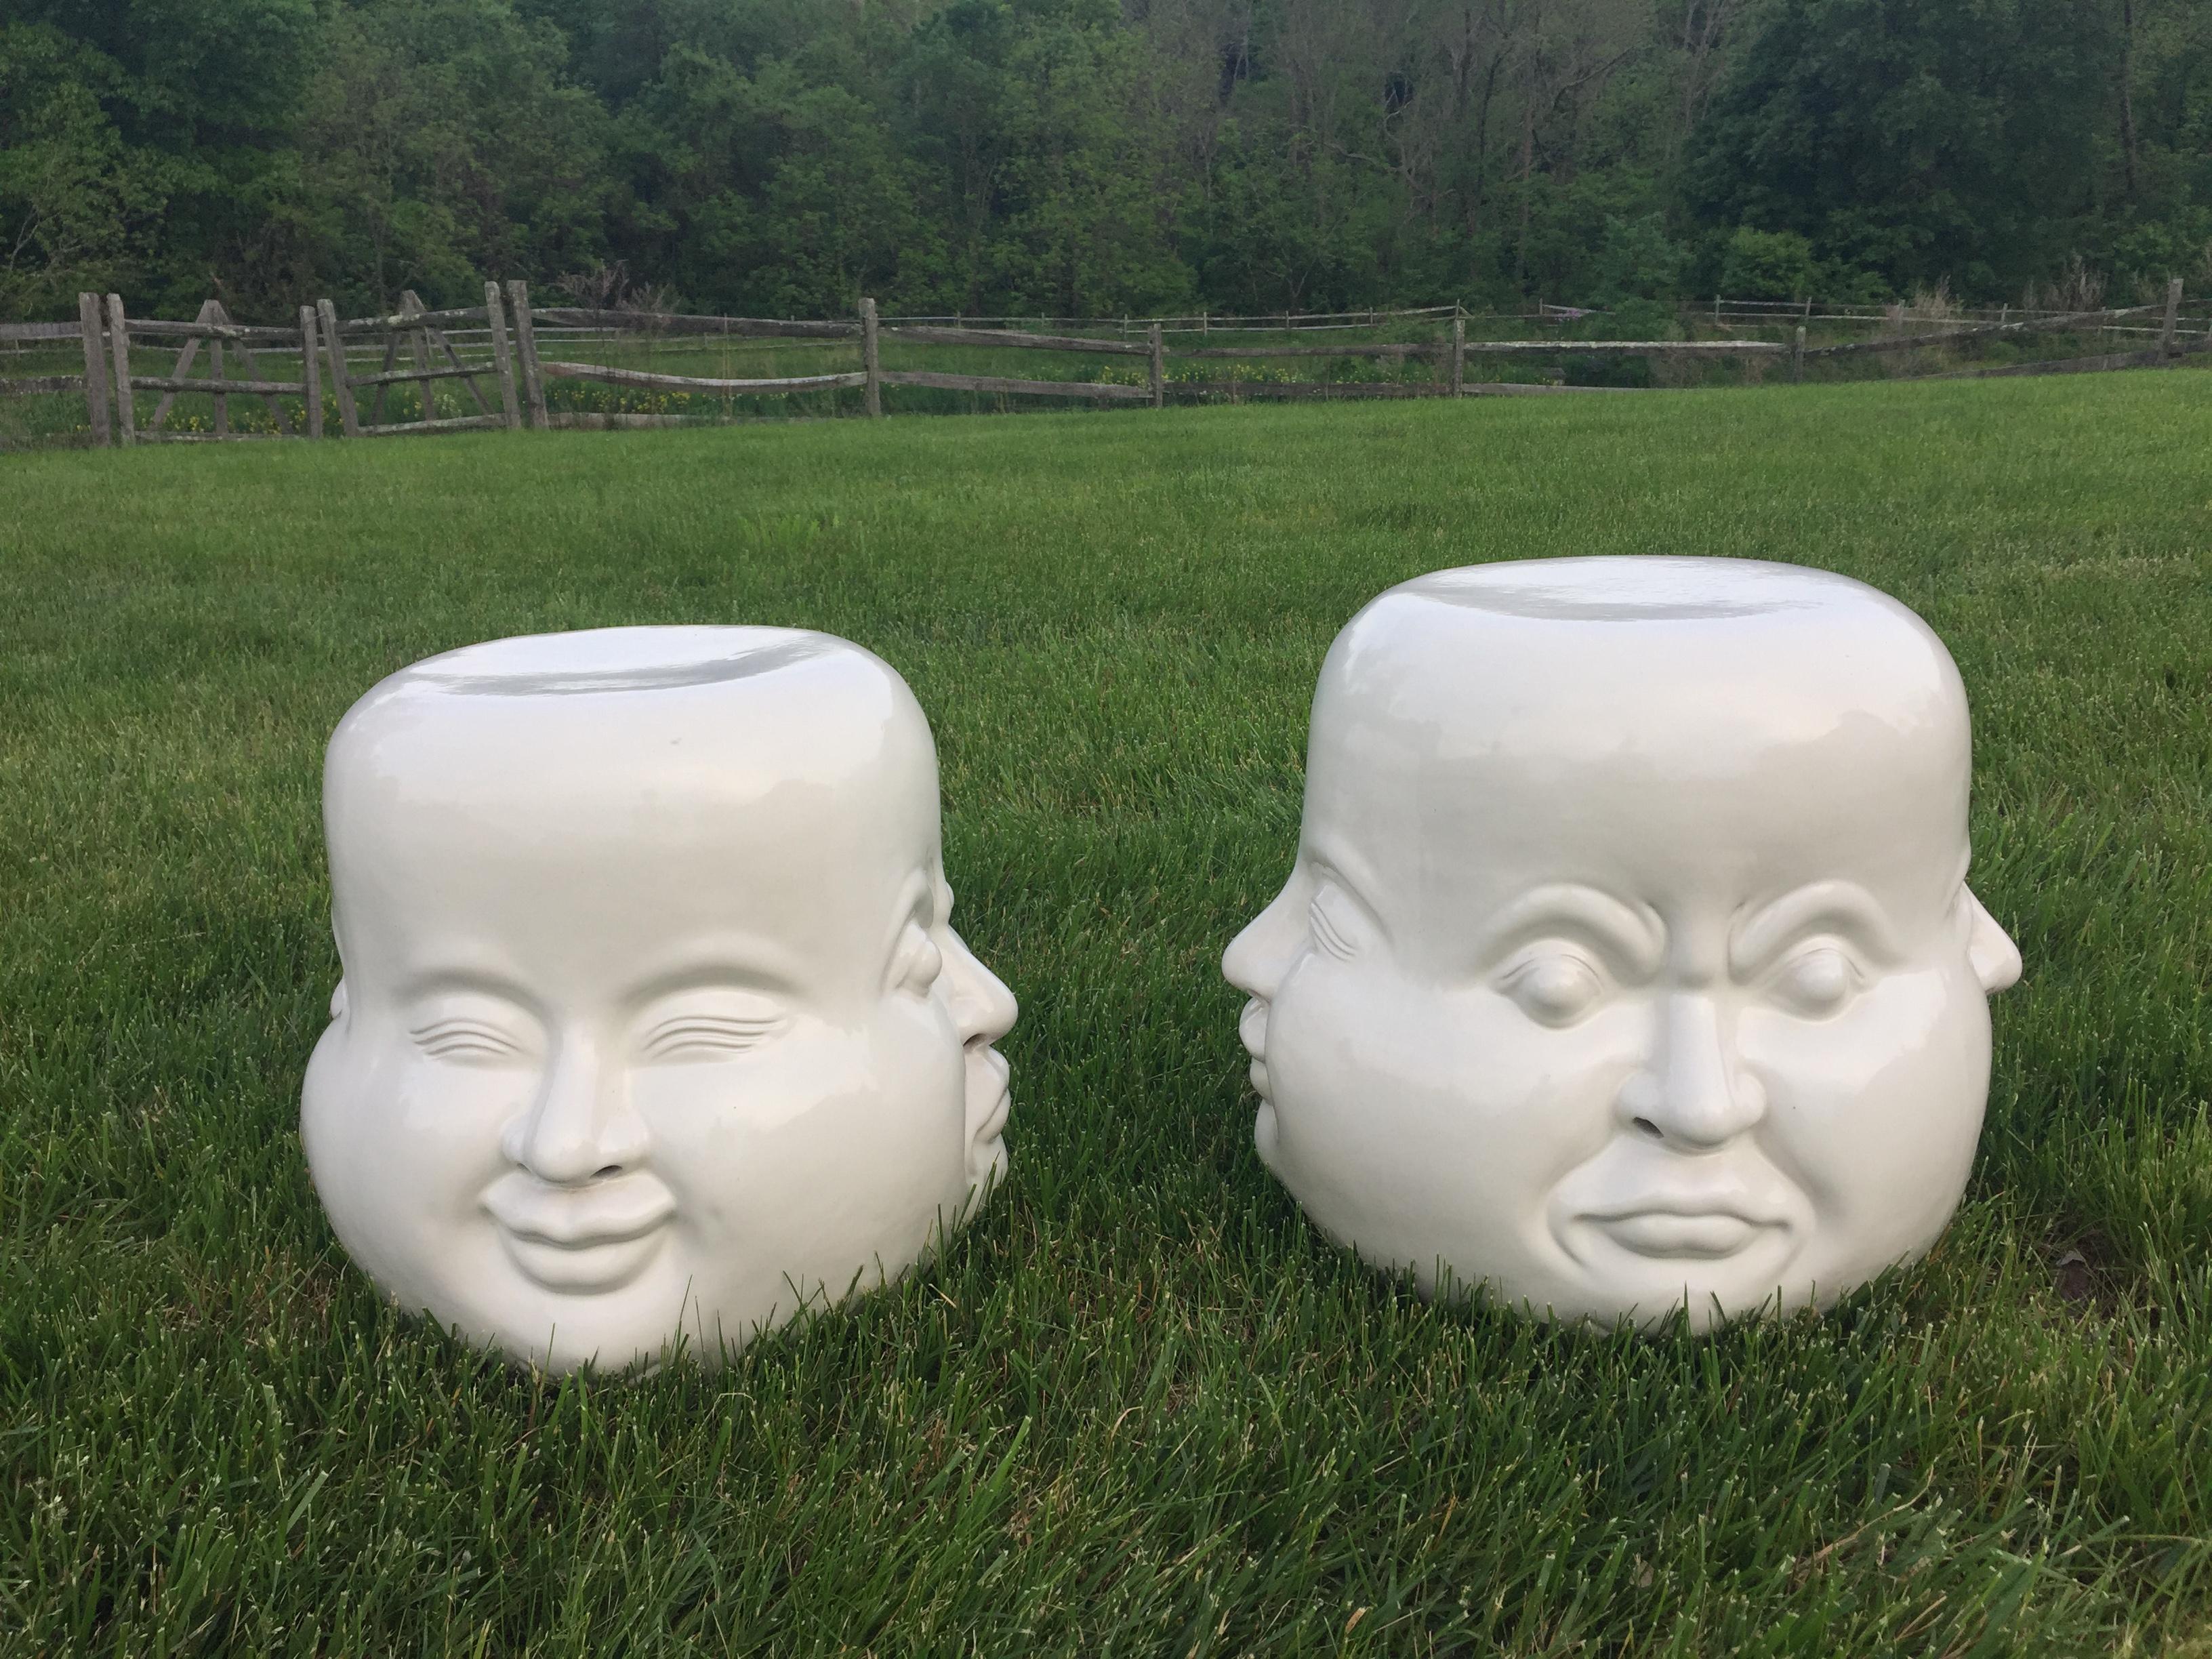 Two fabulous white ceramic round garden seat end tables that have 4 different facial expressions, one per side. An exact matched pair. The round surface top is 13 inches in diameter.